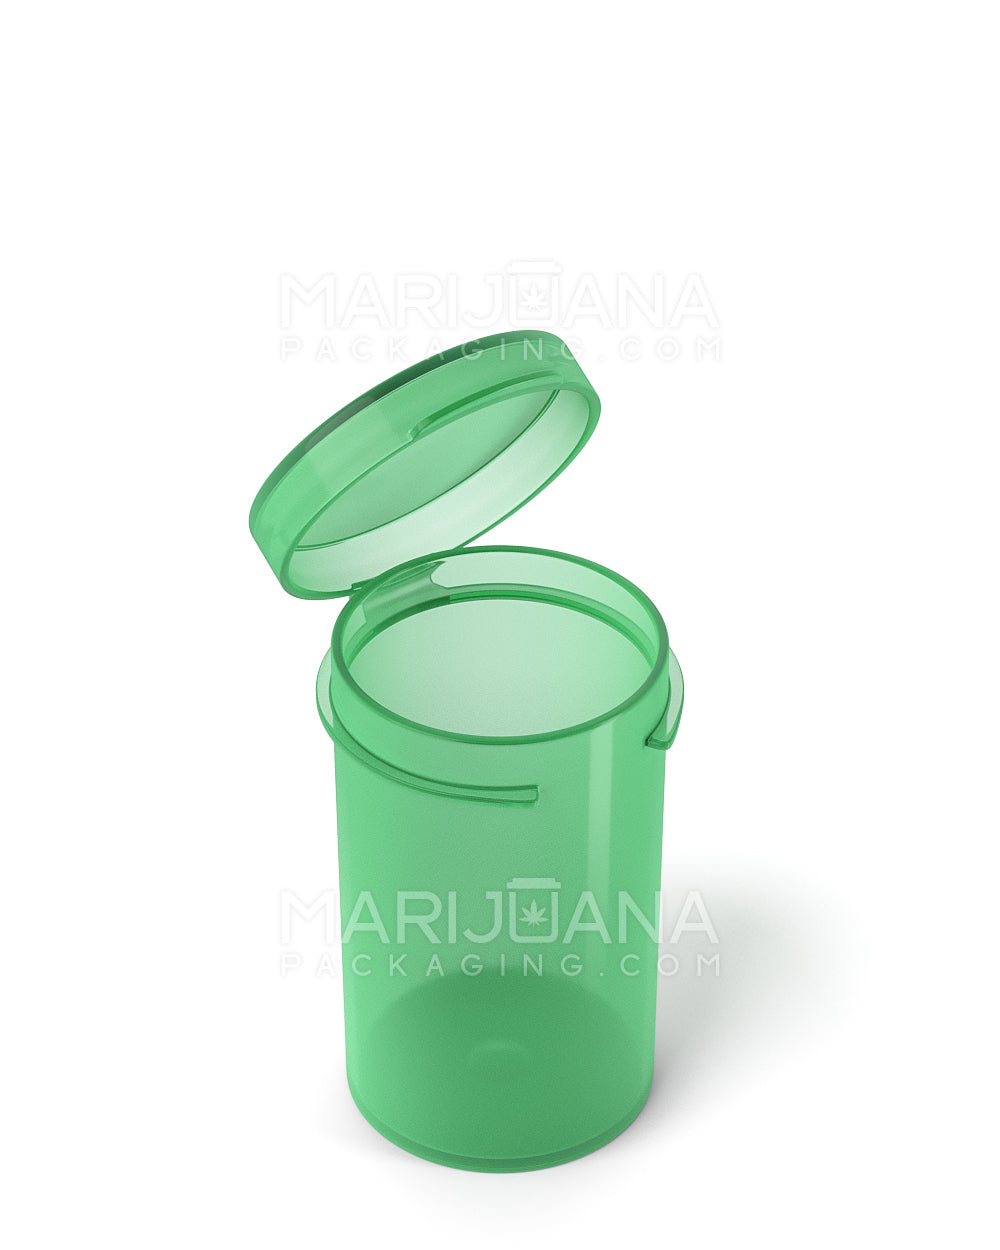 Green Hinged Lid Vials | 6dr - 1g - 600 Count - 3